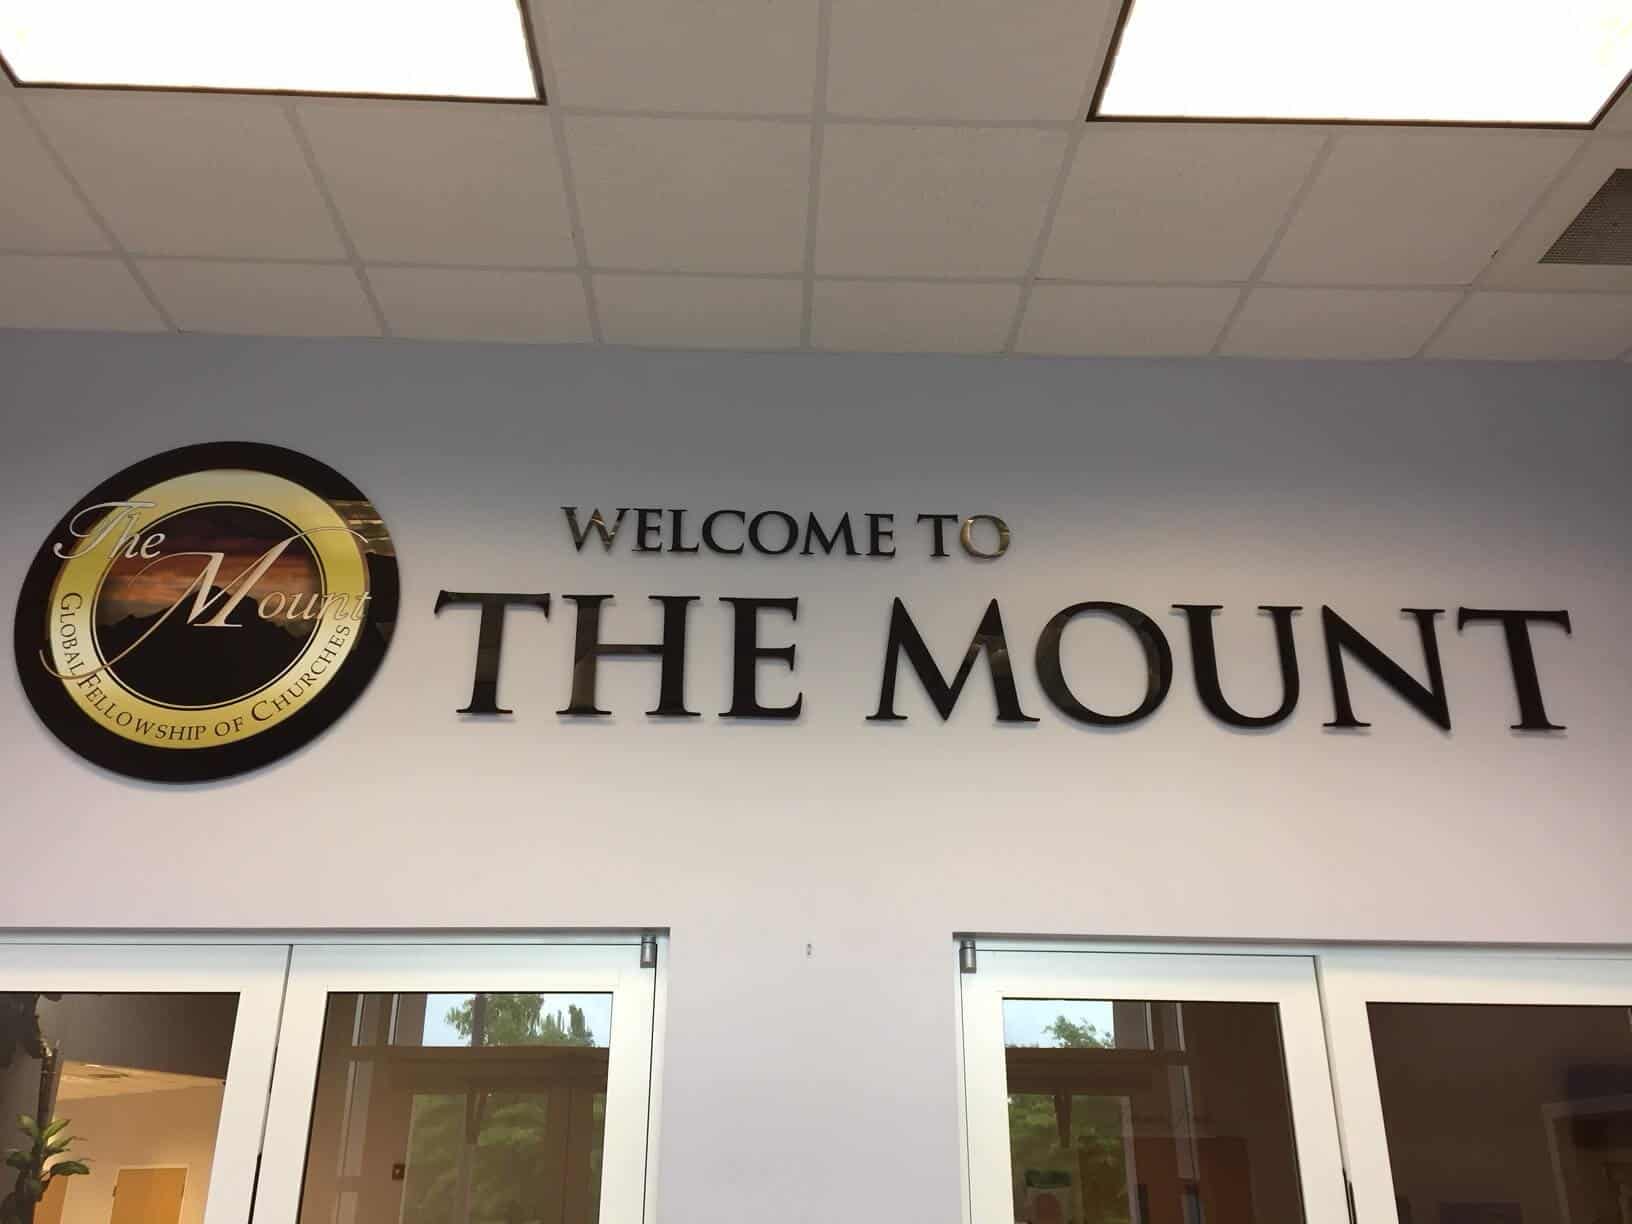 Raised acrylic lettering and logo for The Mount Global Christian Fellowship